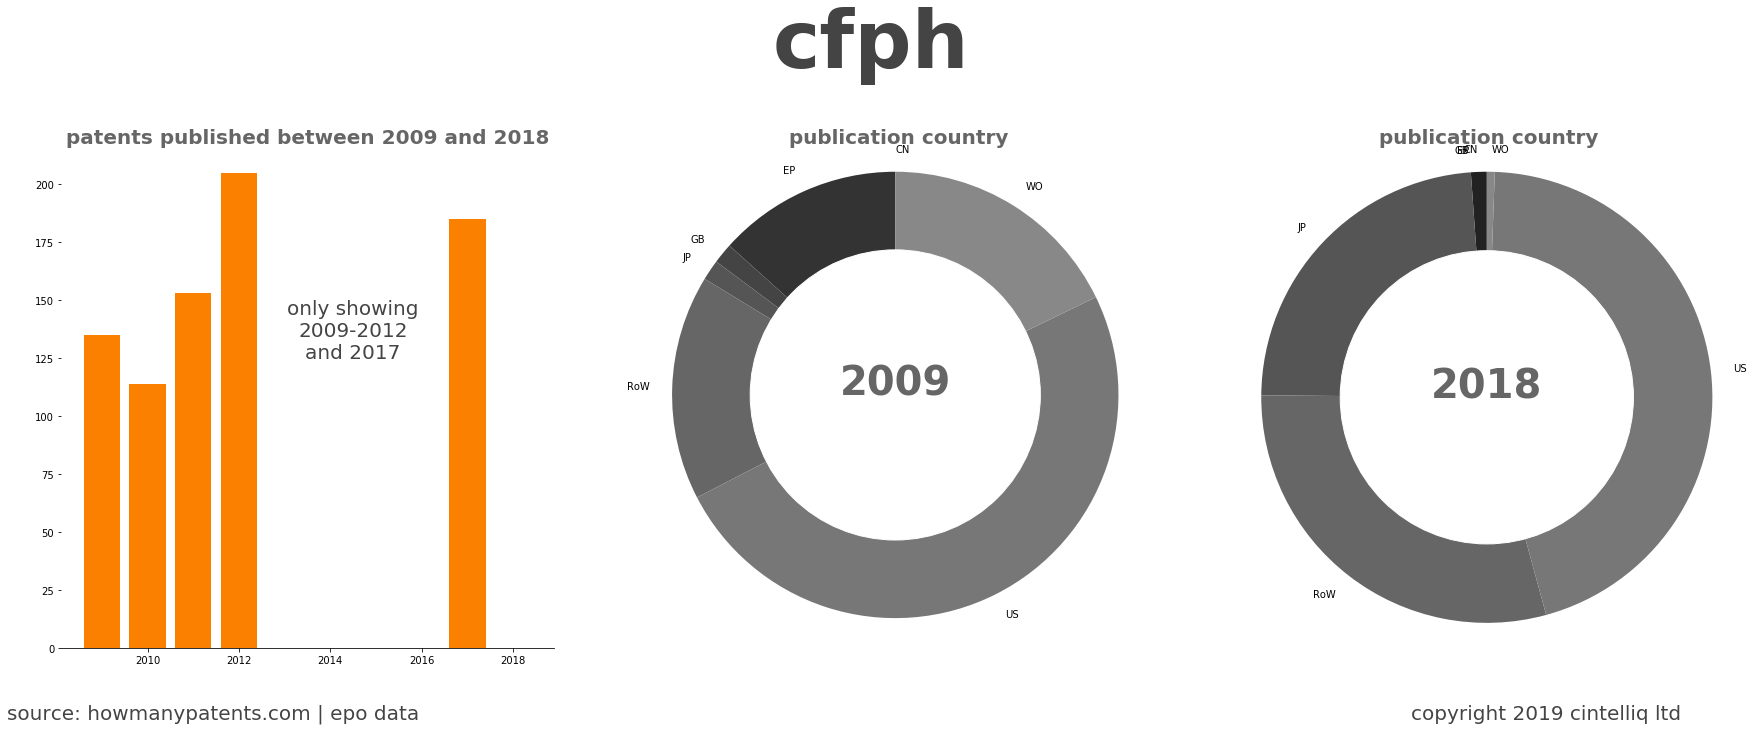 summary of patents for Cfph